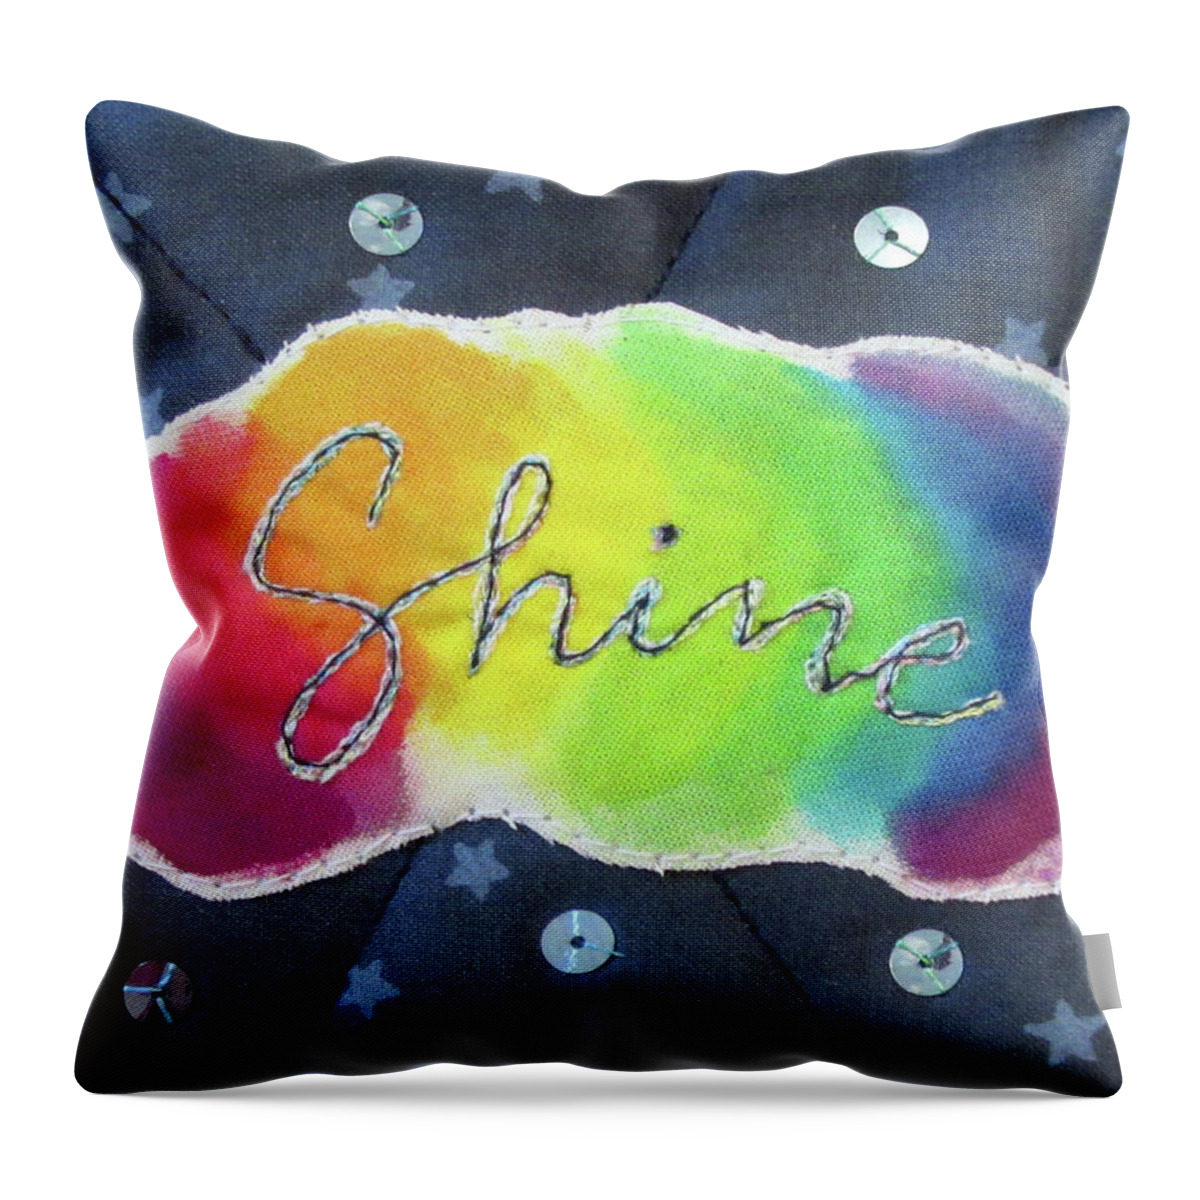 Fiber Art Throw Pillow featuring the tapestry - textile Shine by Pam Geisel